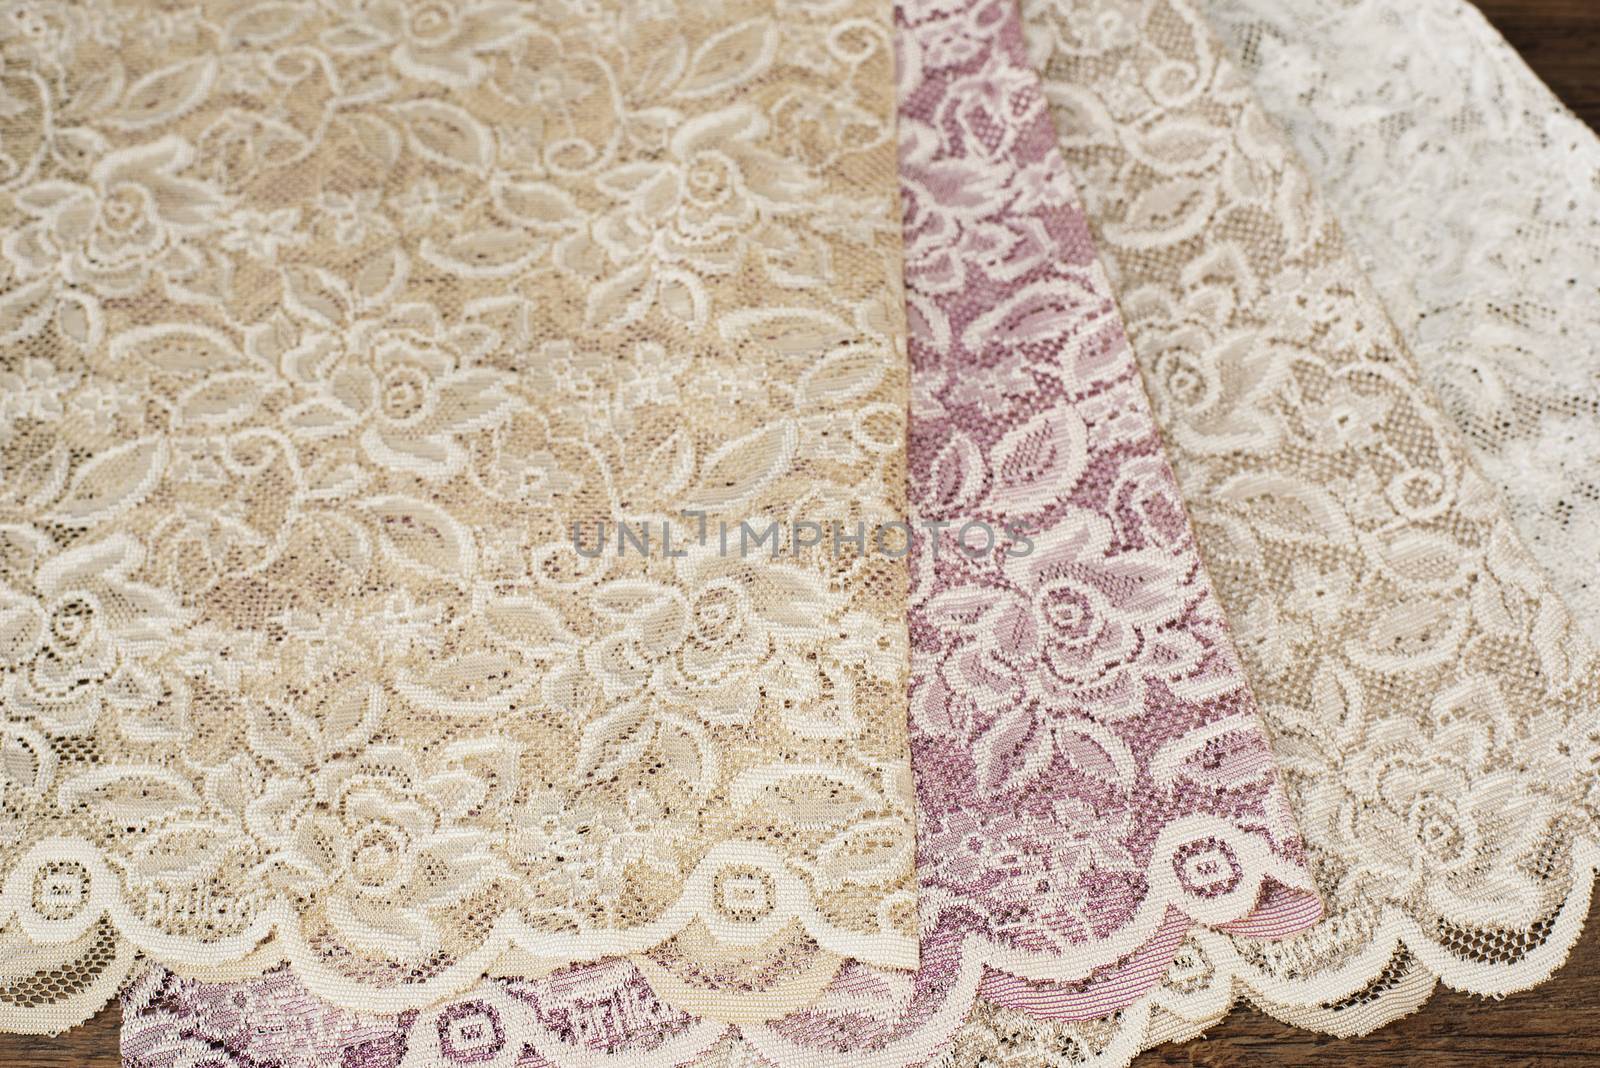 Close up of Beautiful Sheer Curtains Fabric Samples. Texture, Background, Pattern. Wedding Concept. Interior Design. Vintage Lace Tulle Chiffon ? White, Purple, Beige by sevda_stancheva